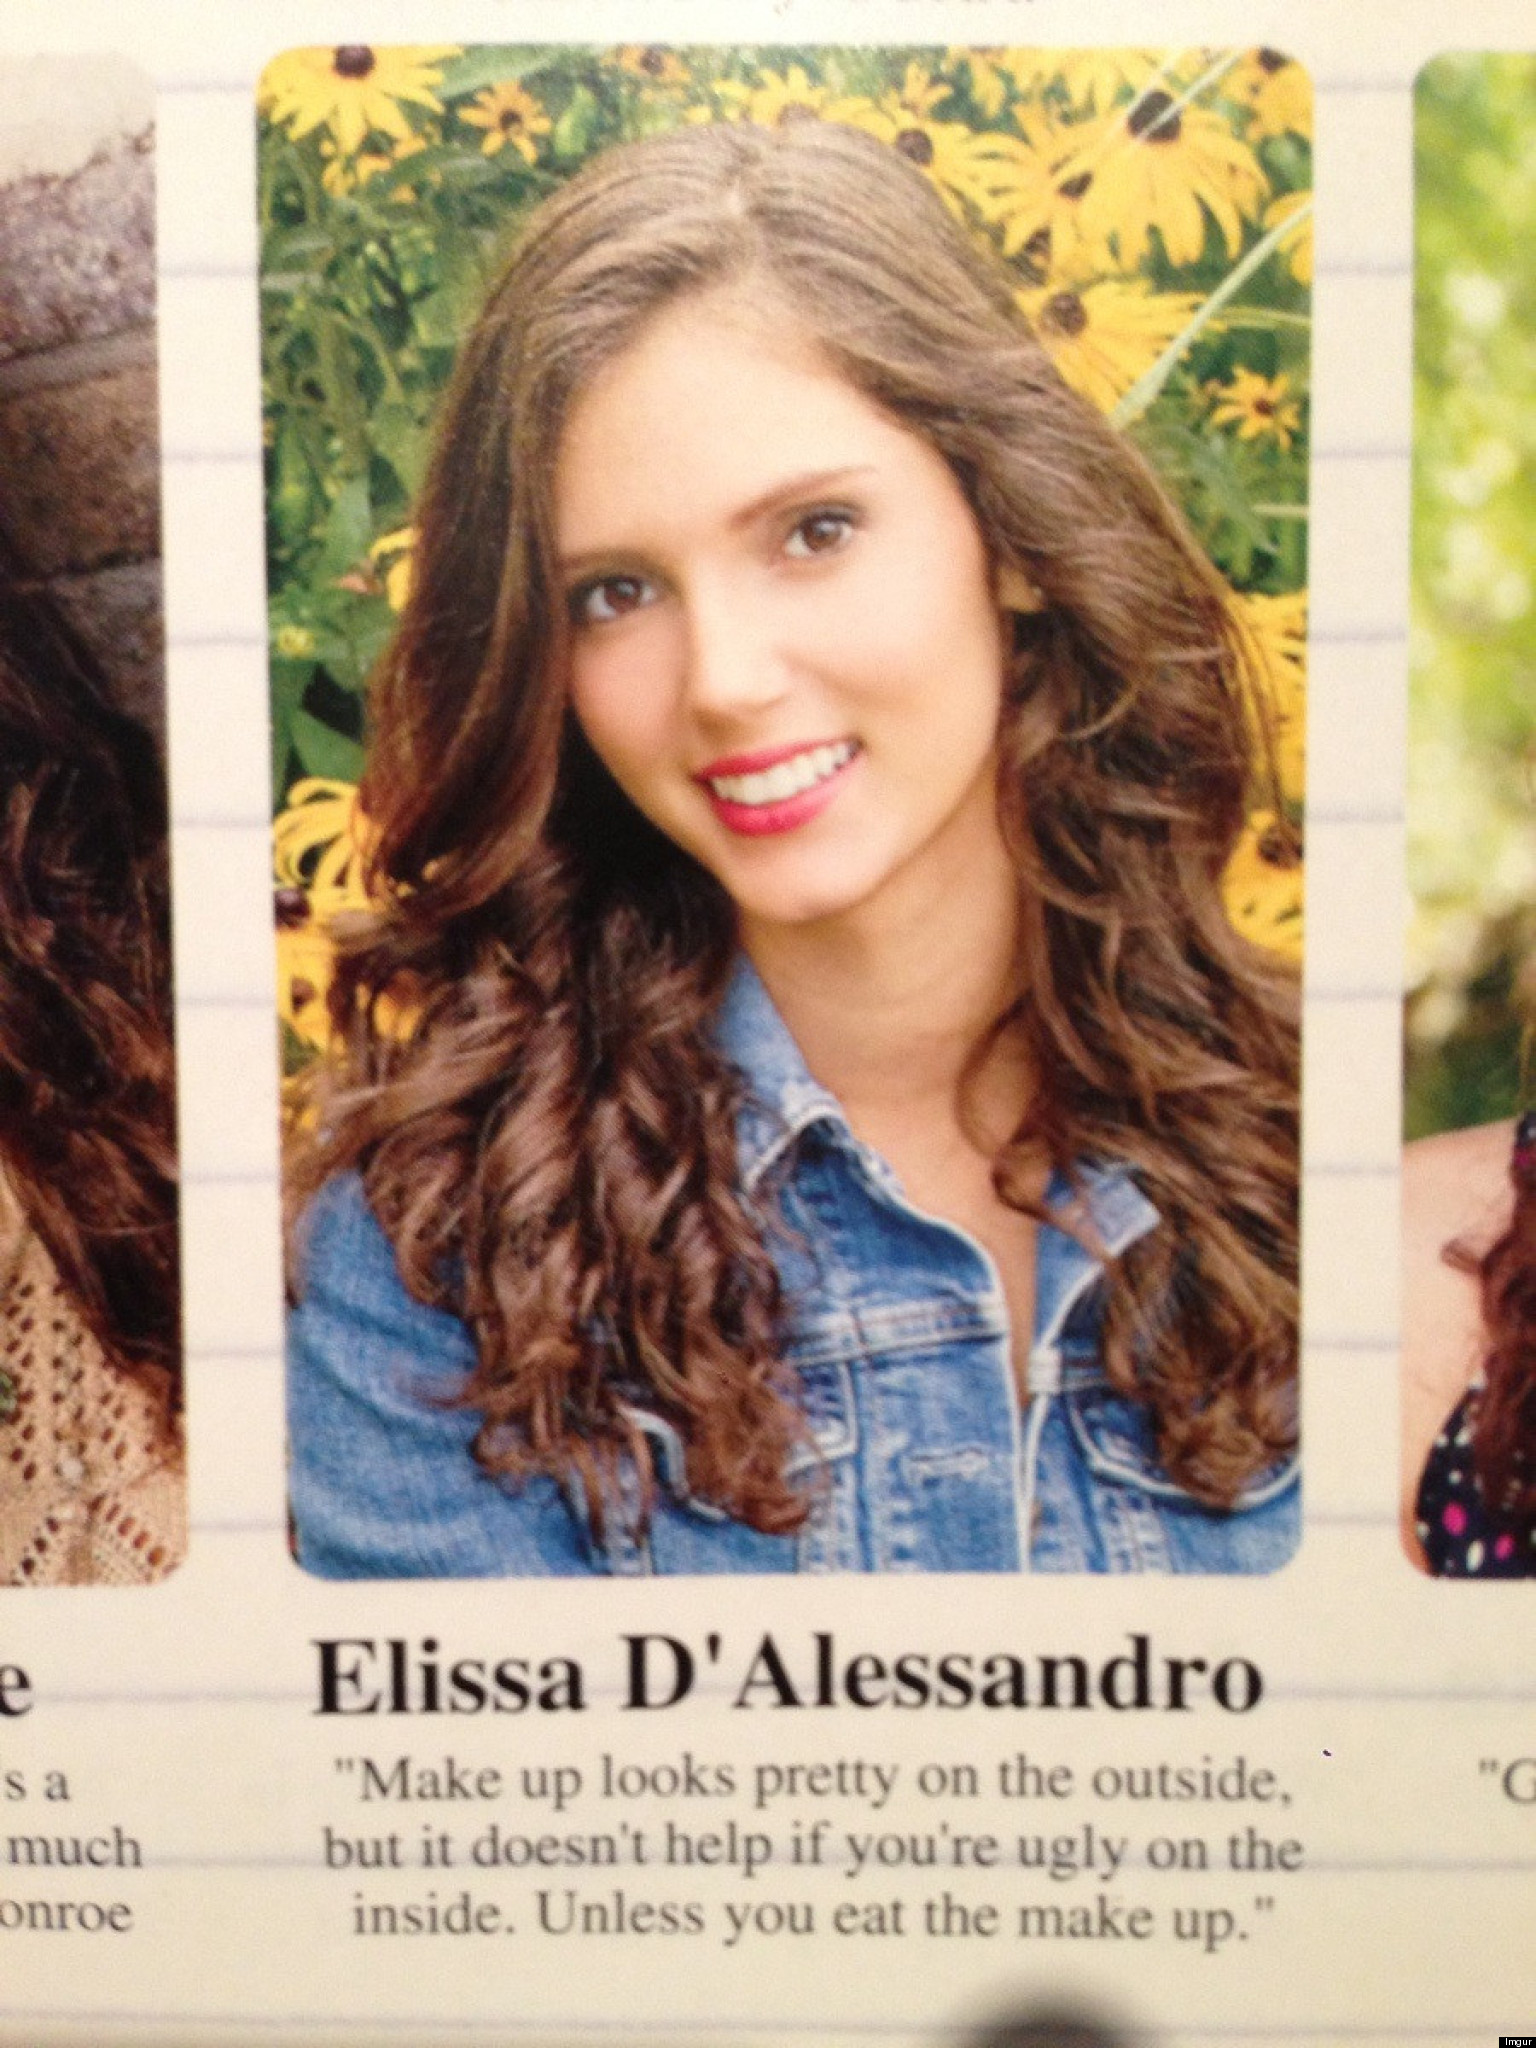 Makeup Yearbook Quote Lends Some Interesting Advice (PHOTO) | HuffPost